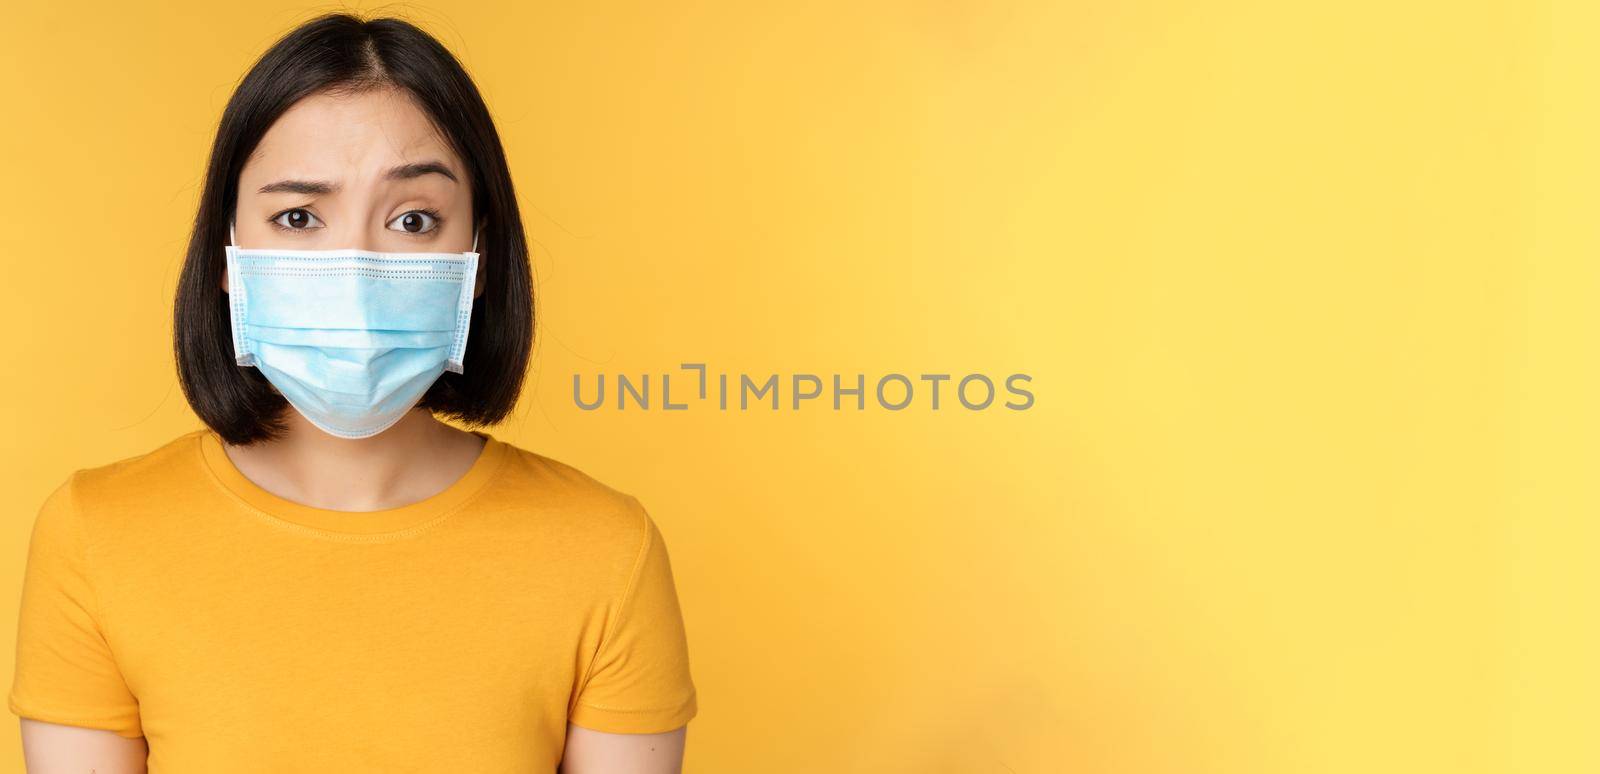 Portrait of skeptical and confused asian woman in medical face mask, raising eyebrow doubtful, standing over yellow background.